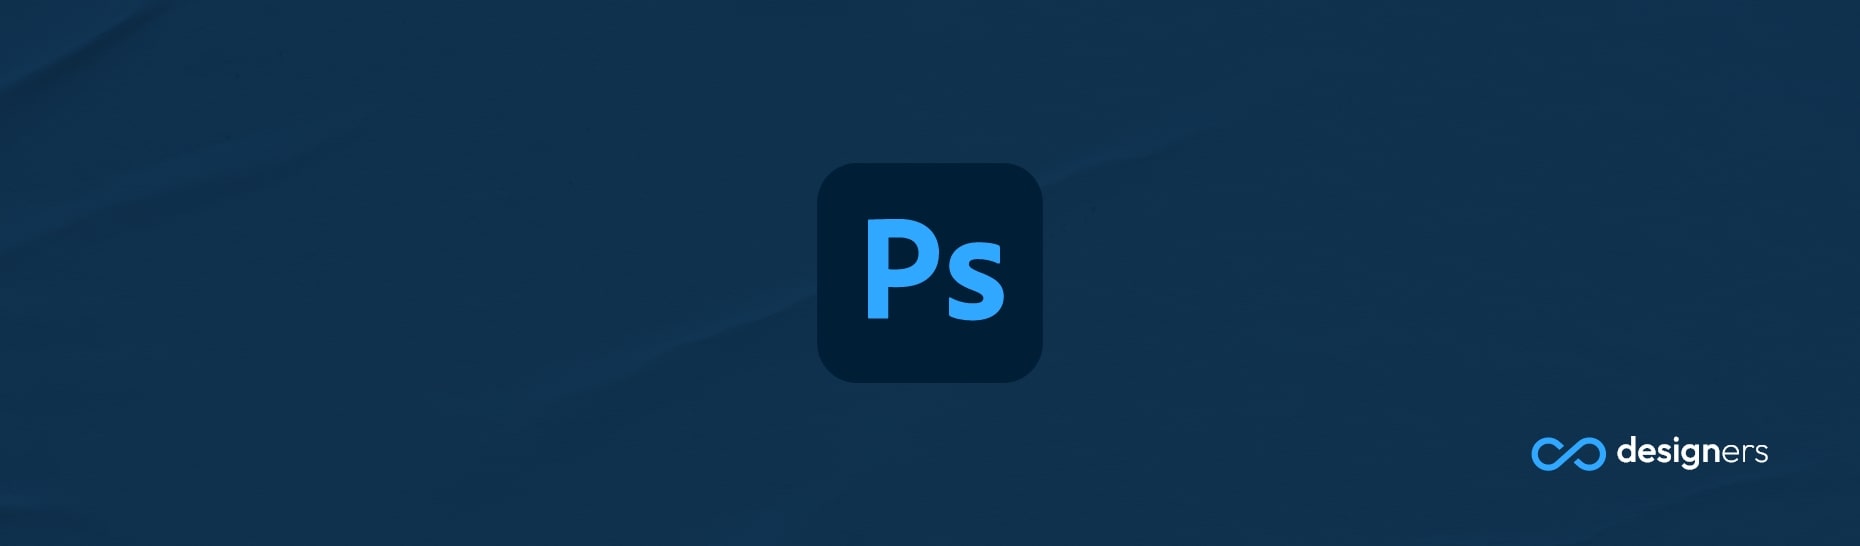 Can You Batch Watermark in Photoshop?